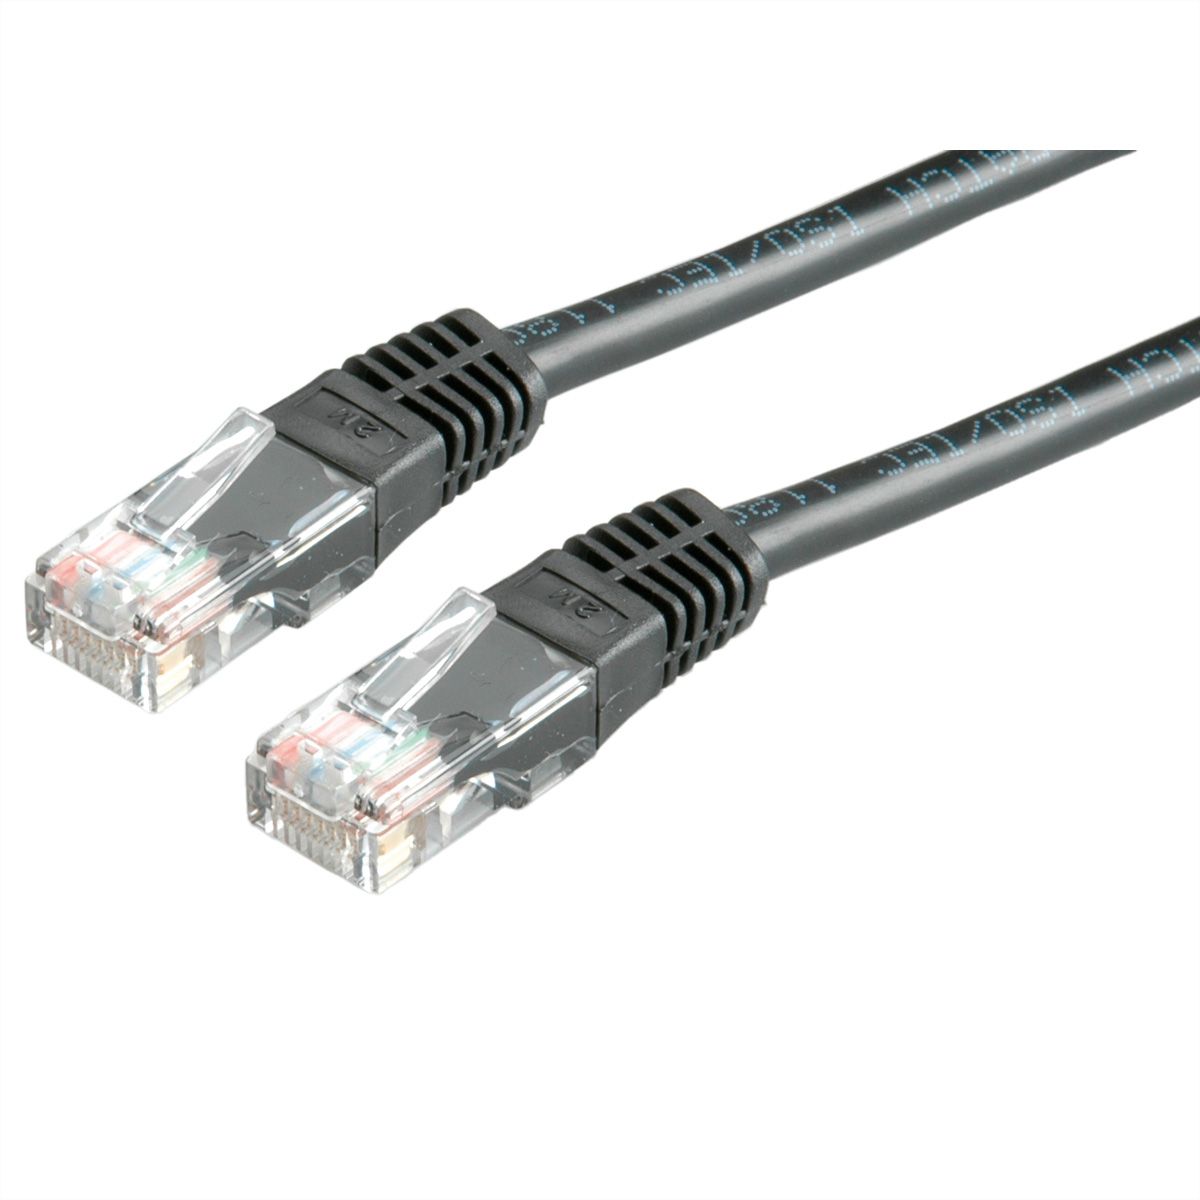 Kentek 50 Feet FT CAT6 UTP Crossover Patch Cable 24 AWG 550 MHz Category 6 Unshielded Twisted Pair Cross-Over Snagless Molded Boot Ethernet RJ45 Network Cord PC Mac Hub Gray 